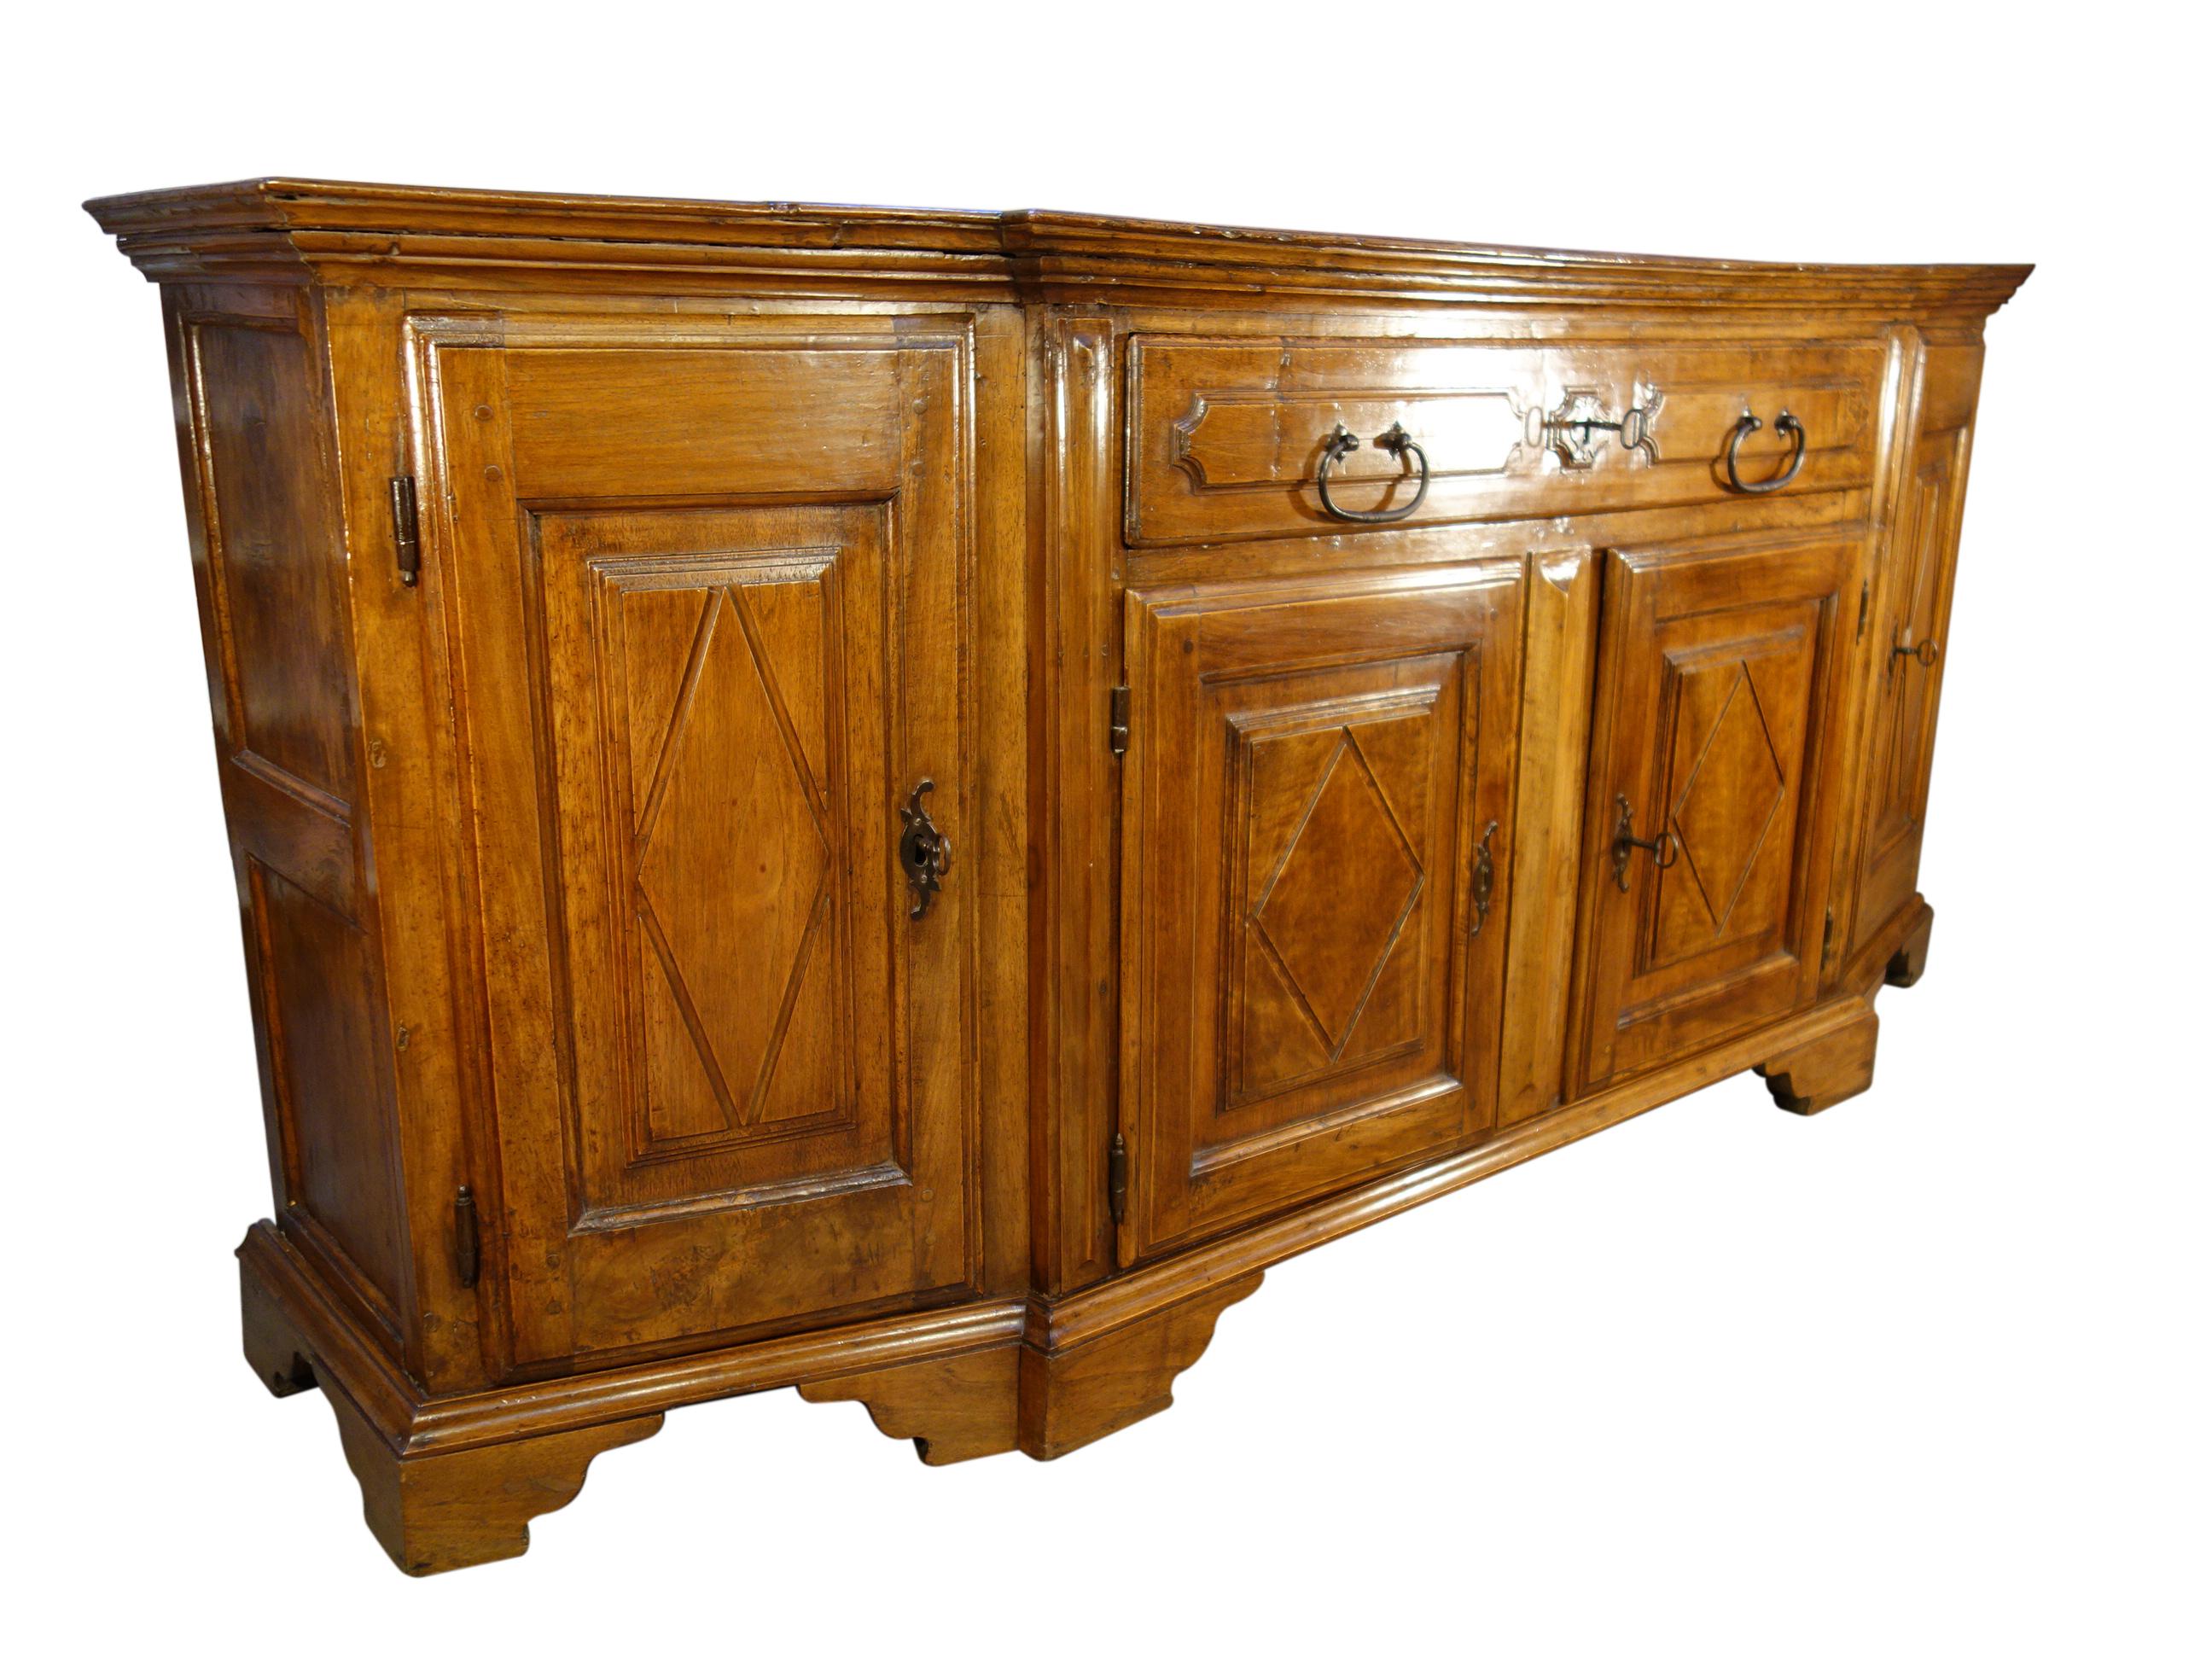 18th century 4-door walnut Scantonata credenza with 1 centered large drawer and angled sides. Handsome architecture & carved diamond (losanghe) details. Beautiful grain with classic patina. Forged hardware, large pulls, locks & keys. Well preserved,